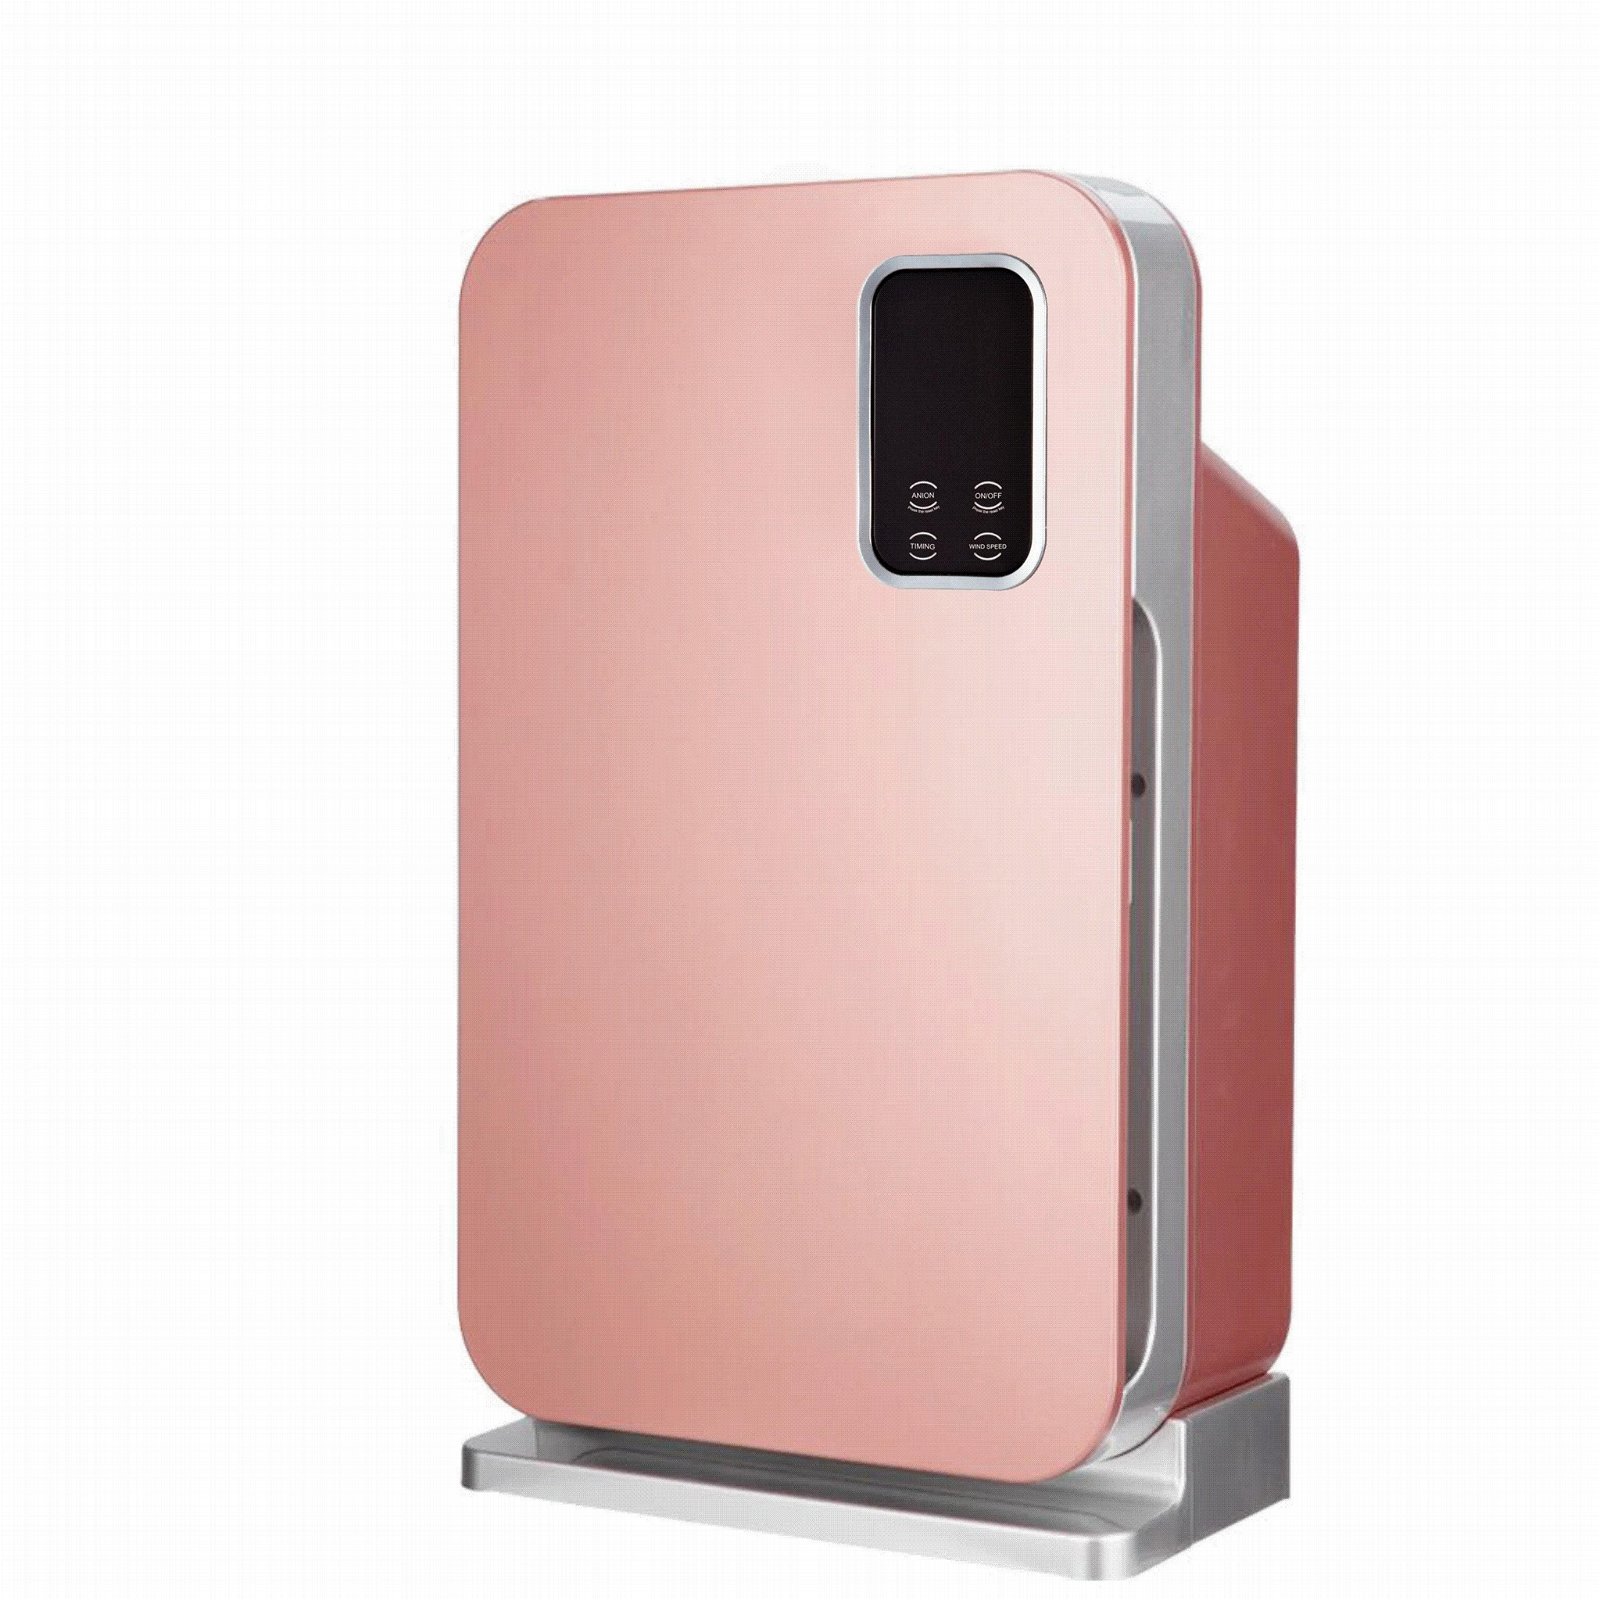 Best selling air purifier with HEPA